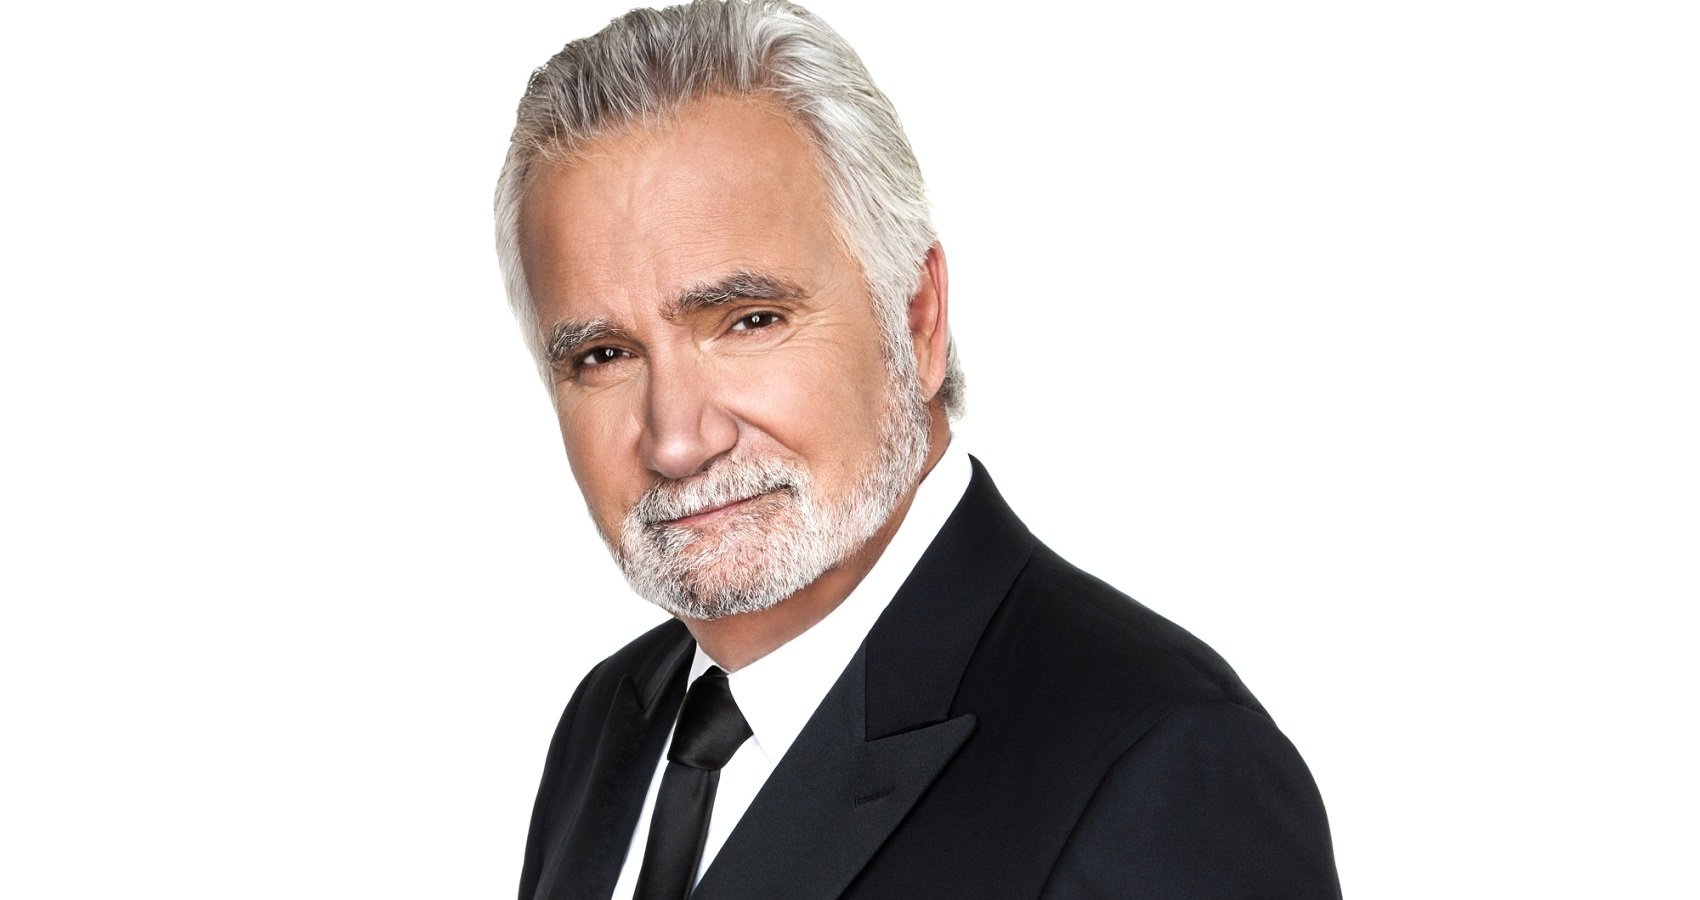 The Bold and the Beautiful stars John McCook as Eric Forrester, pictured here in a publicity shot in a tuxedo against a white background